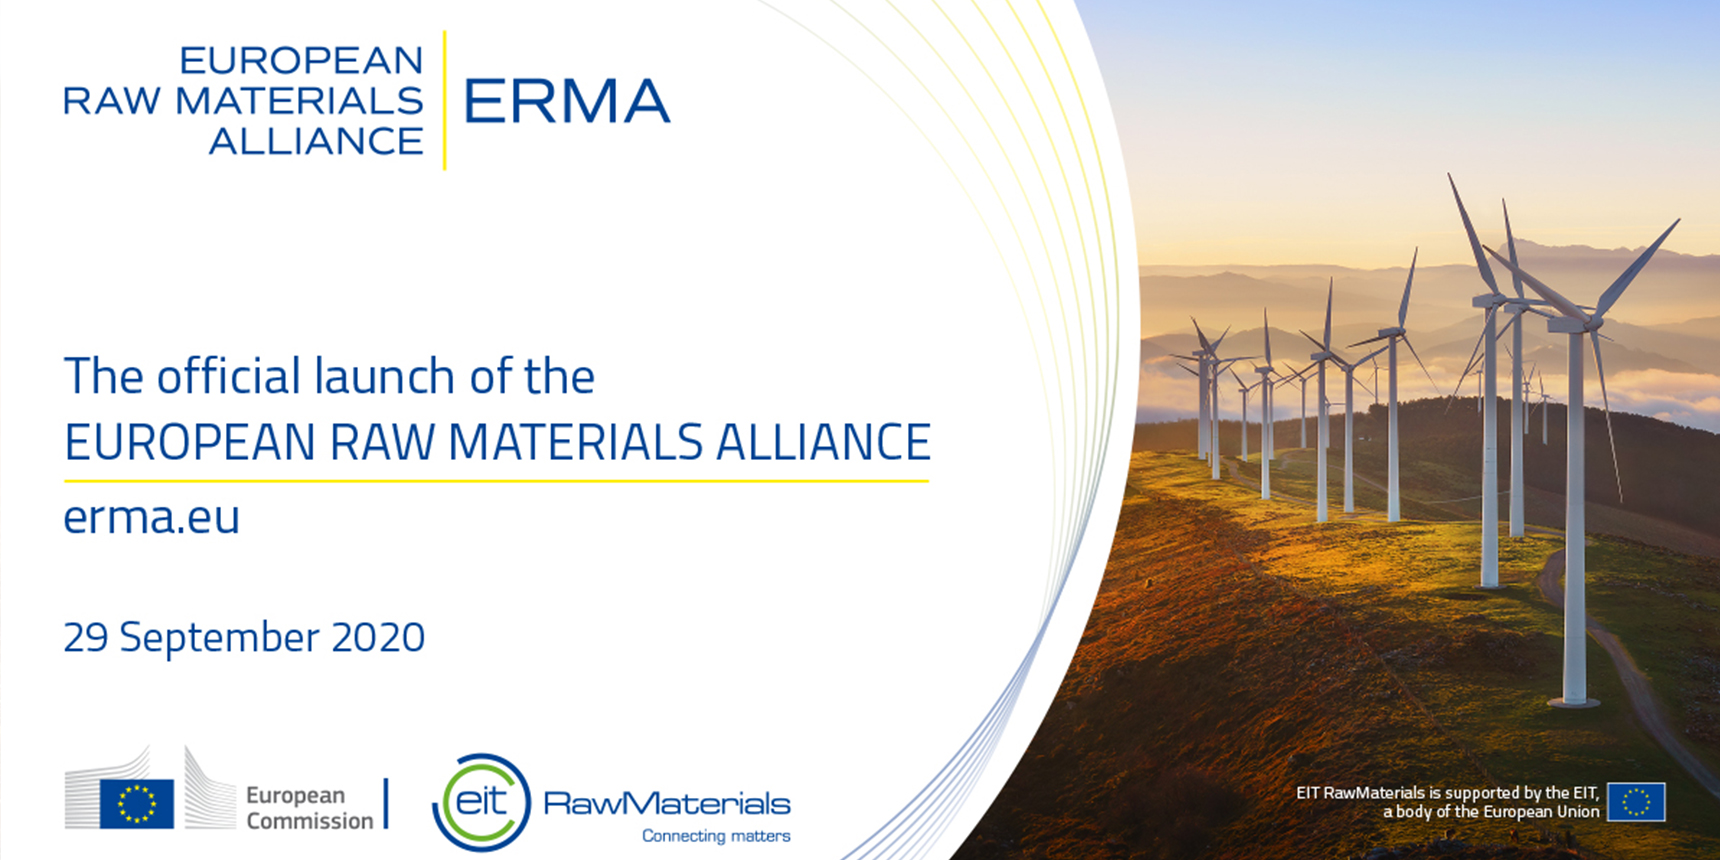 EIT RawMaterials will manage newly launched European Raw Materials Alliance (ERMA)